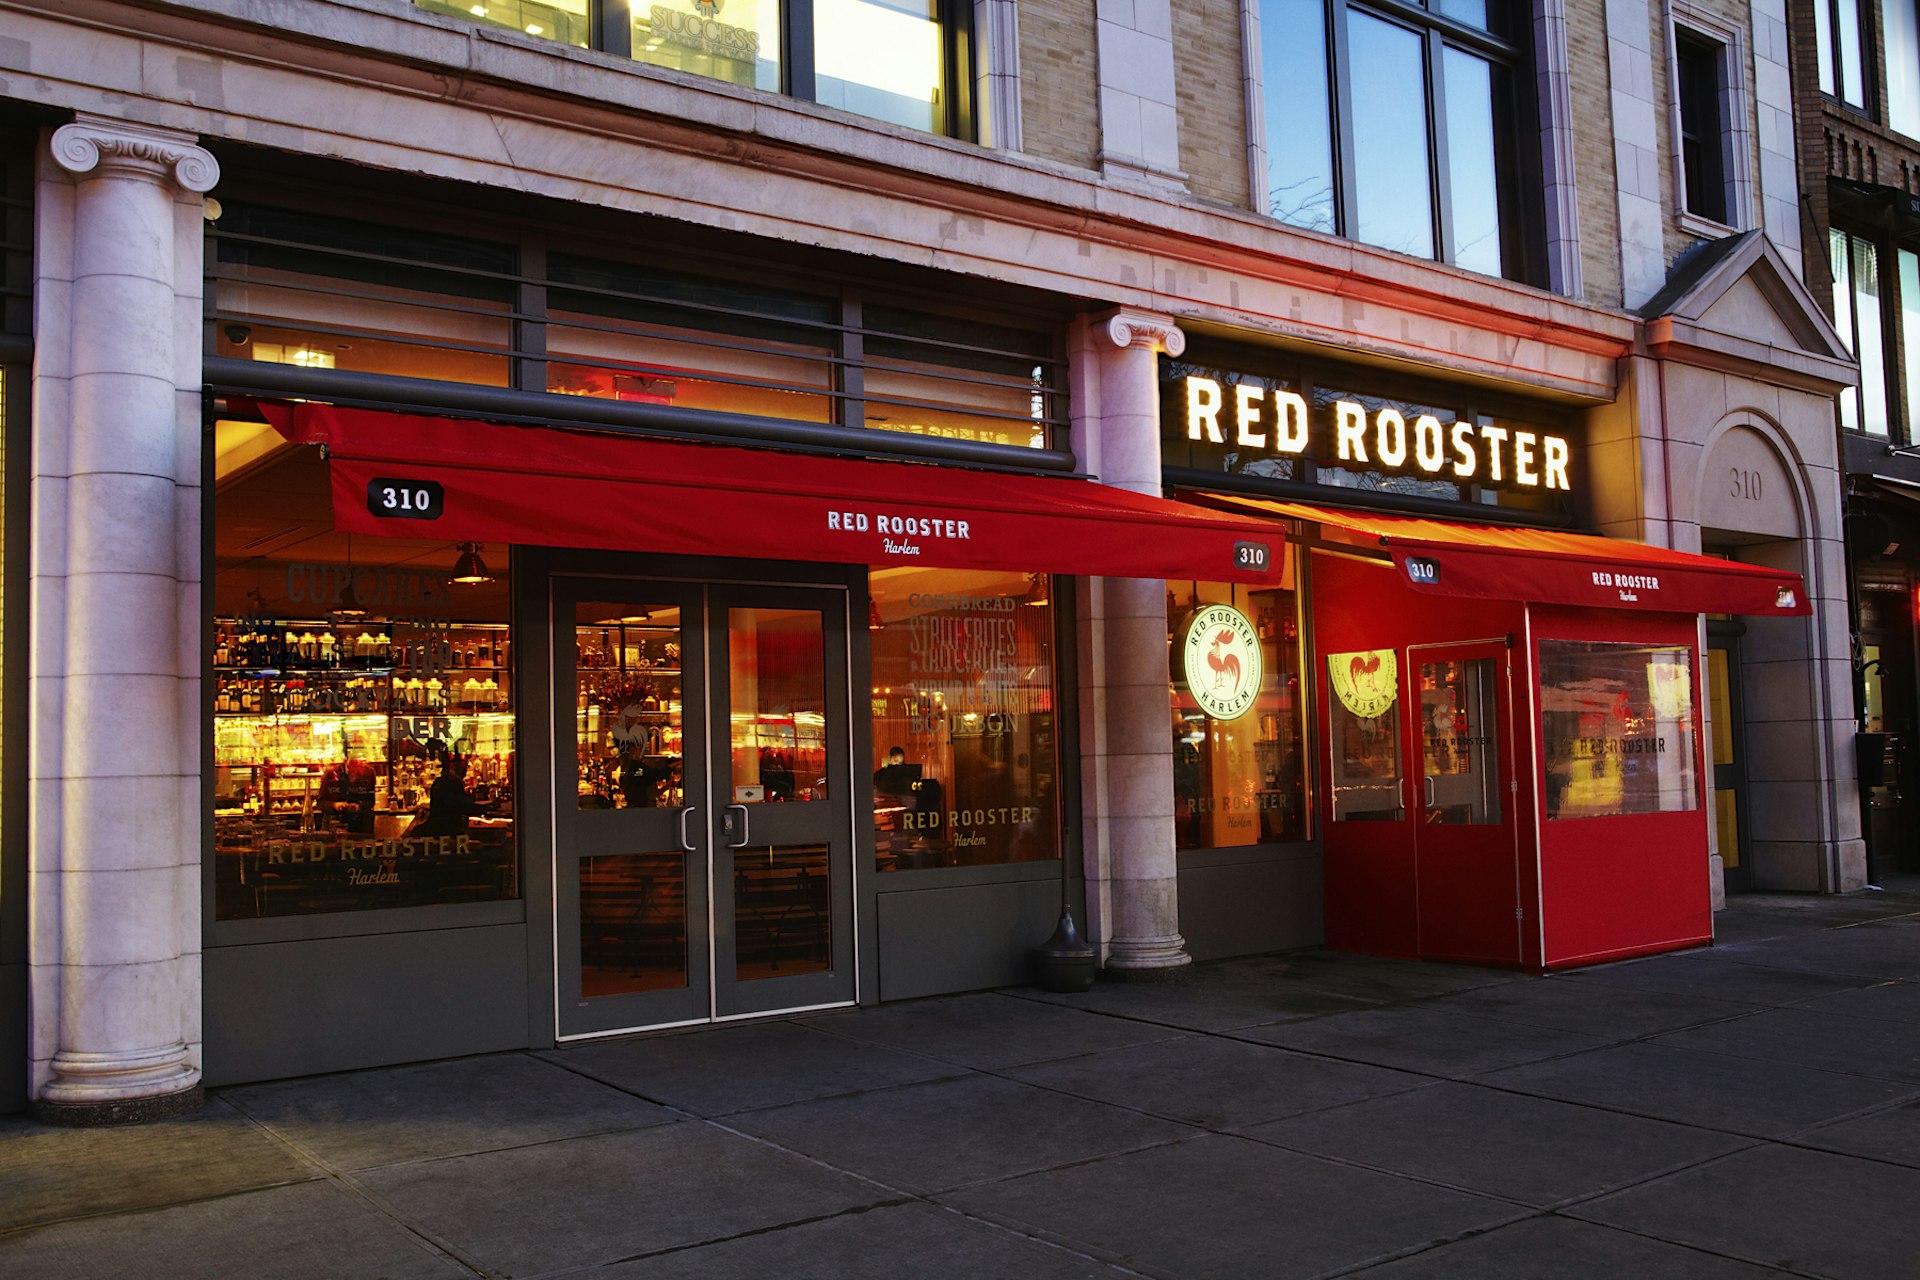 Exterior of Red Rooster. Image courtesy of Red Rooster